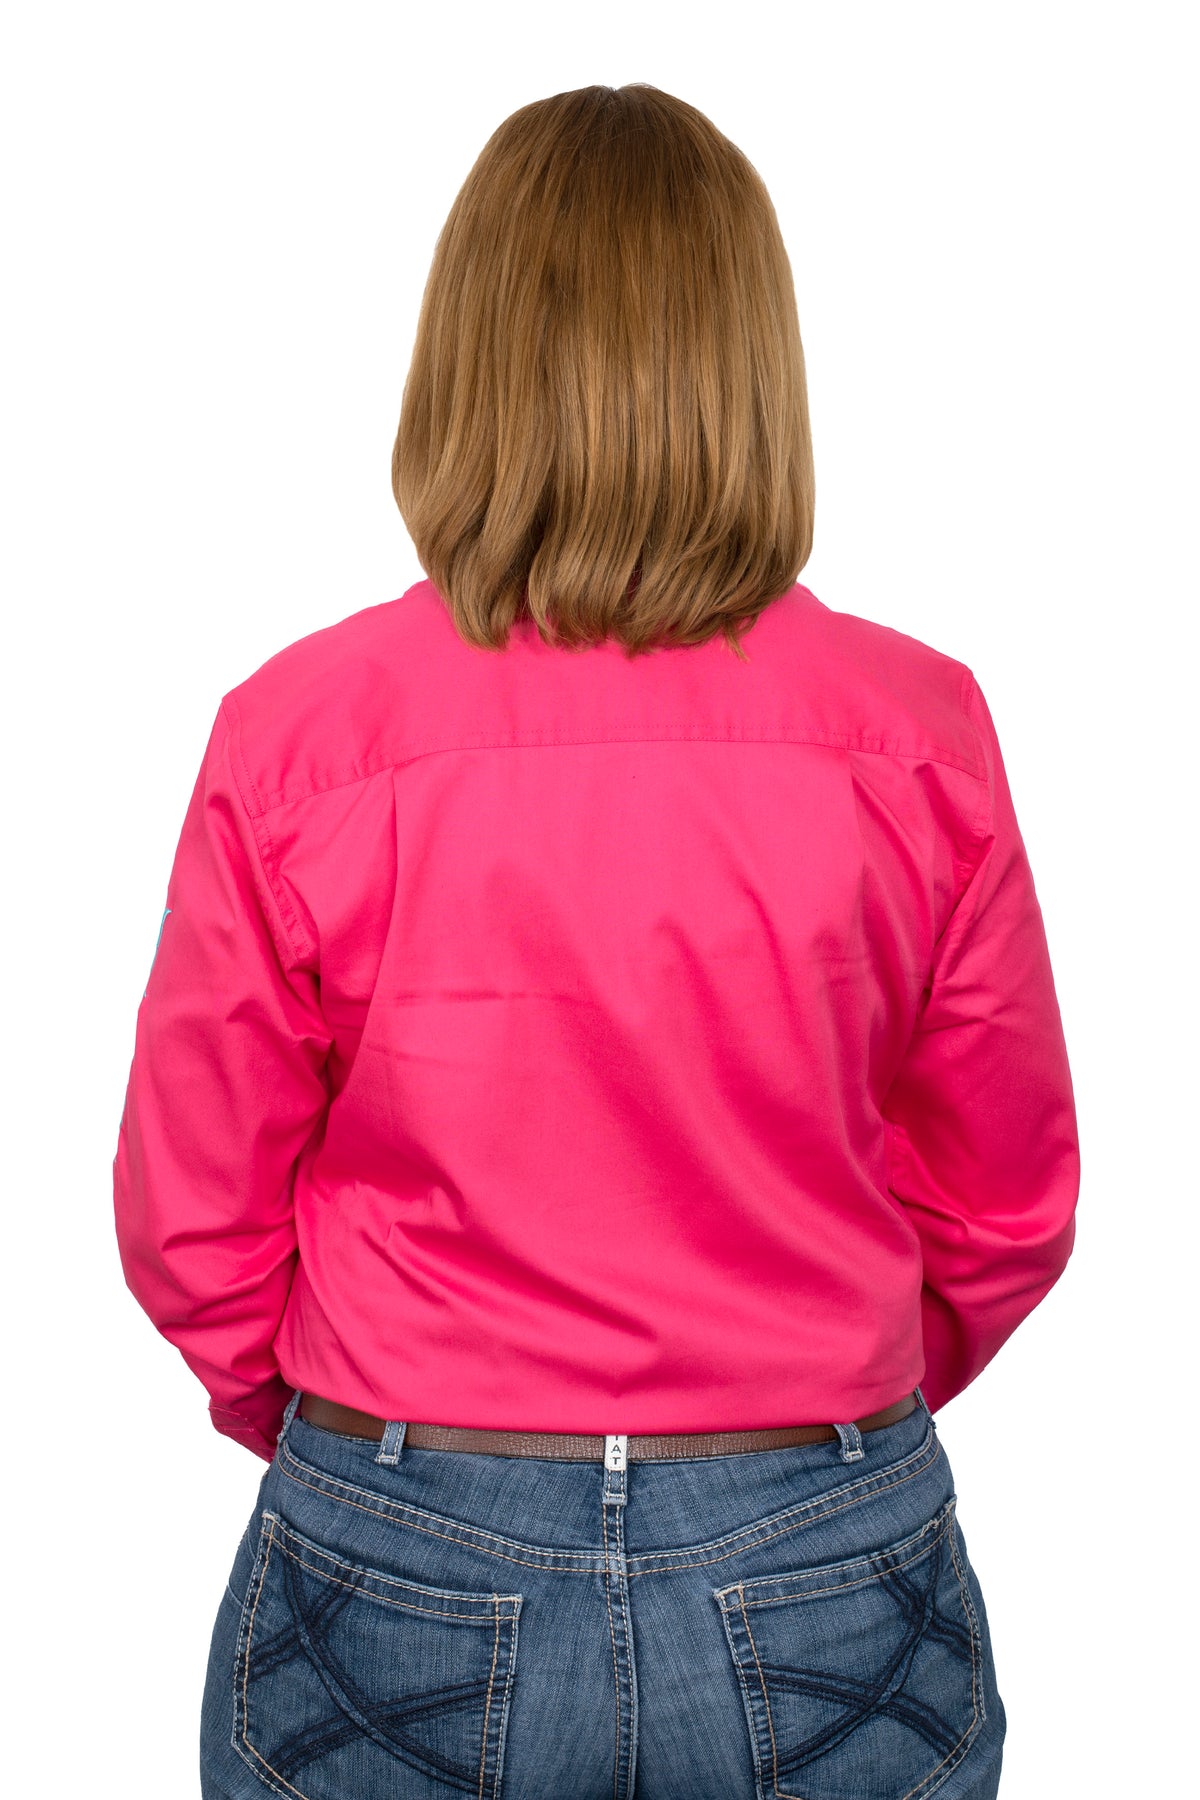 Just Country Brooke Embroidered Shirt - Hot Pink/Turquoise